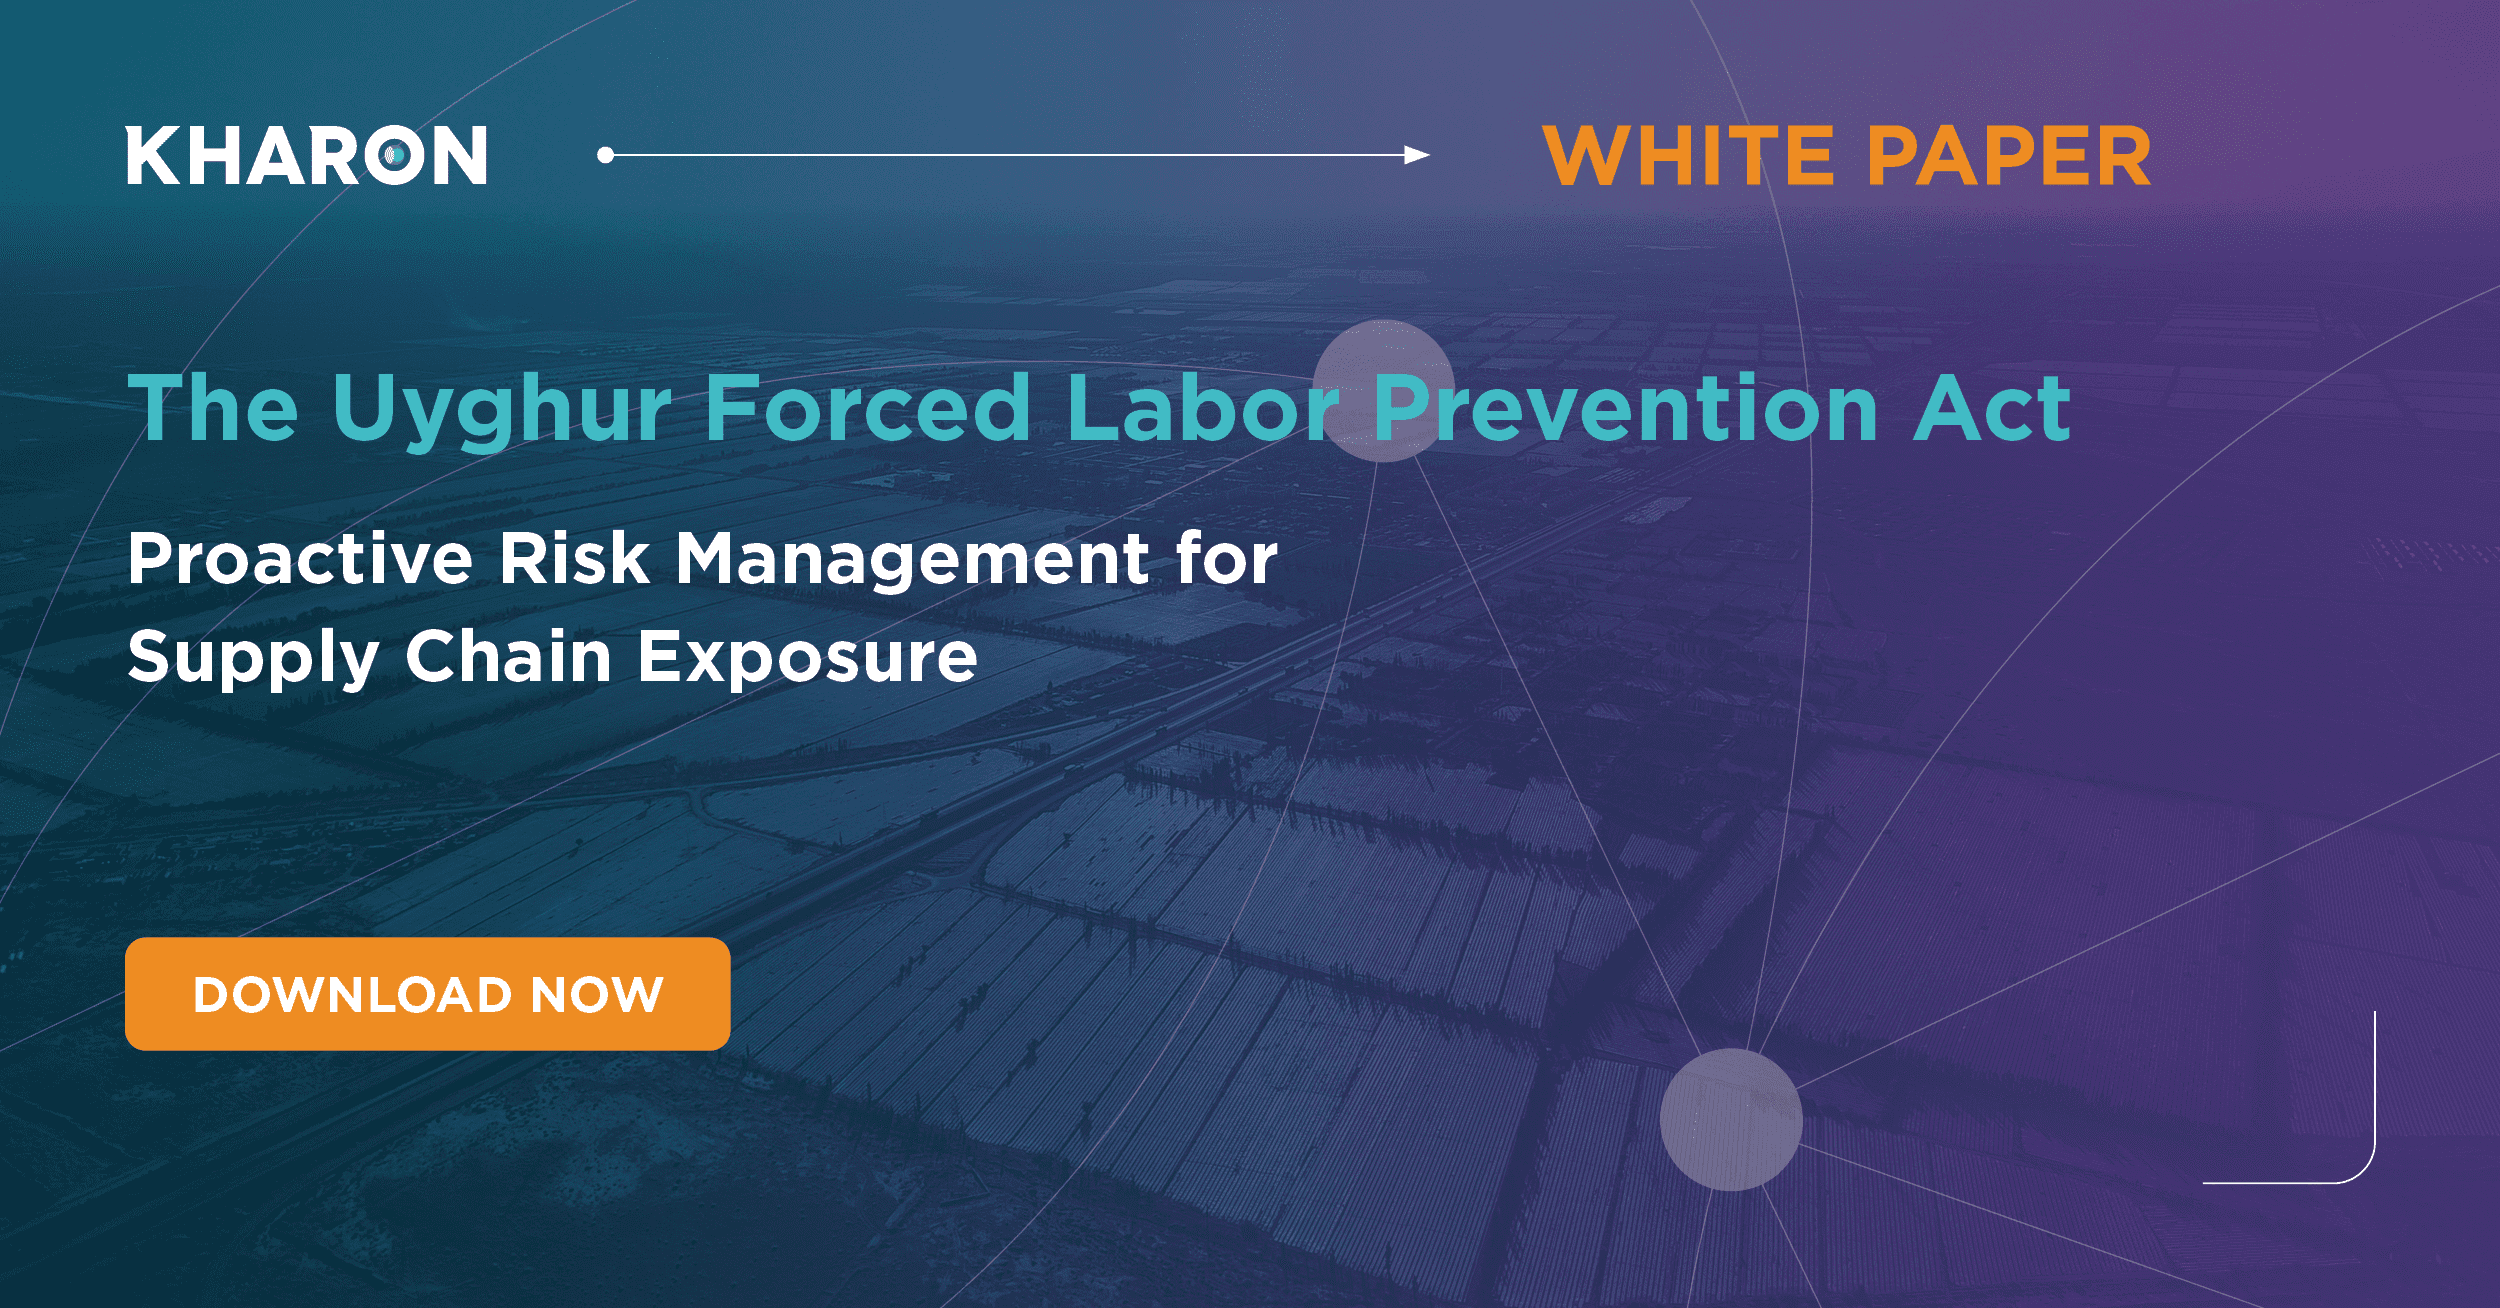 [White Paper] The Uyghur Forced Labor Prevention Act: Proactive Risk Management for Supply Chain Exposure, download now